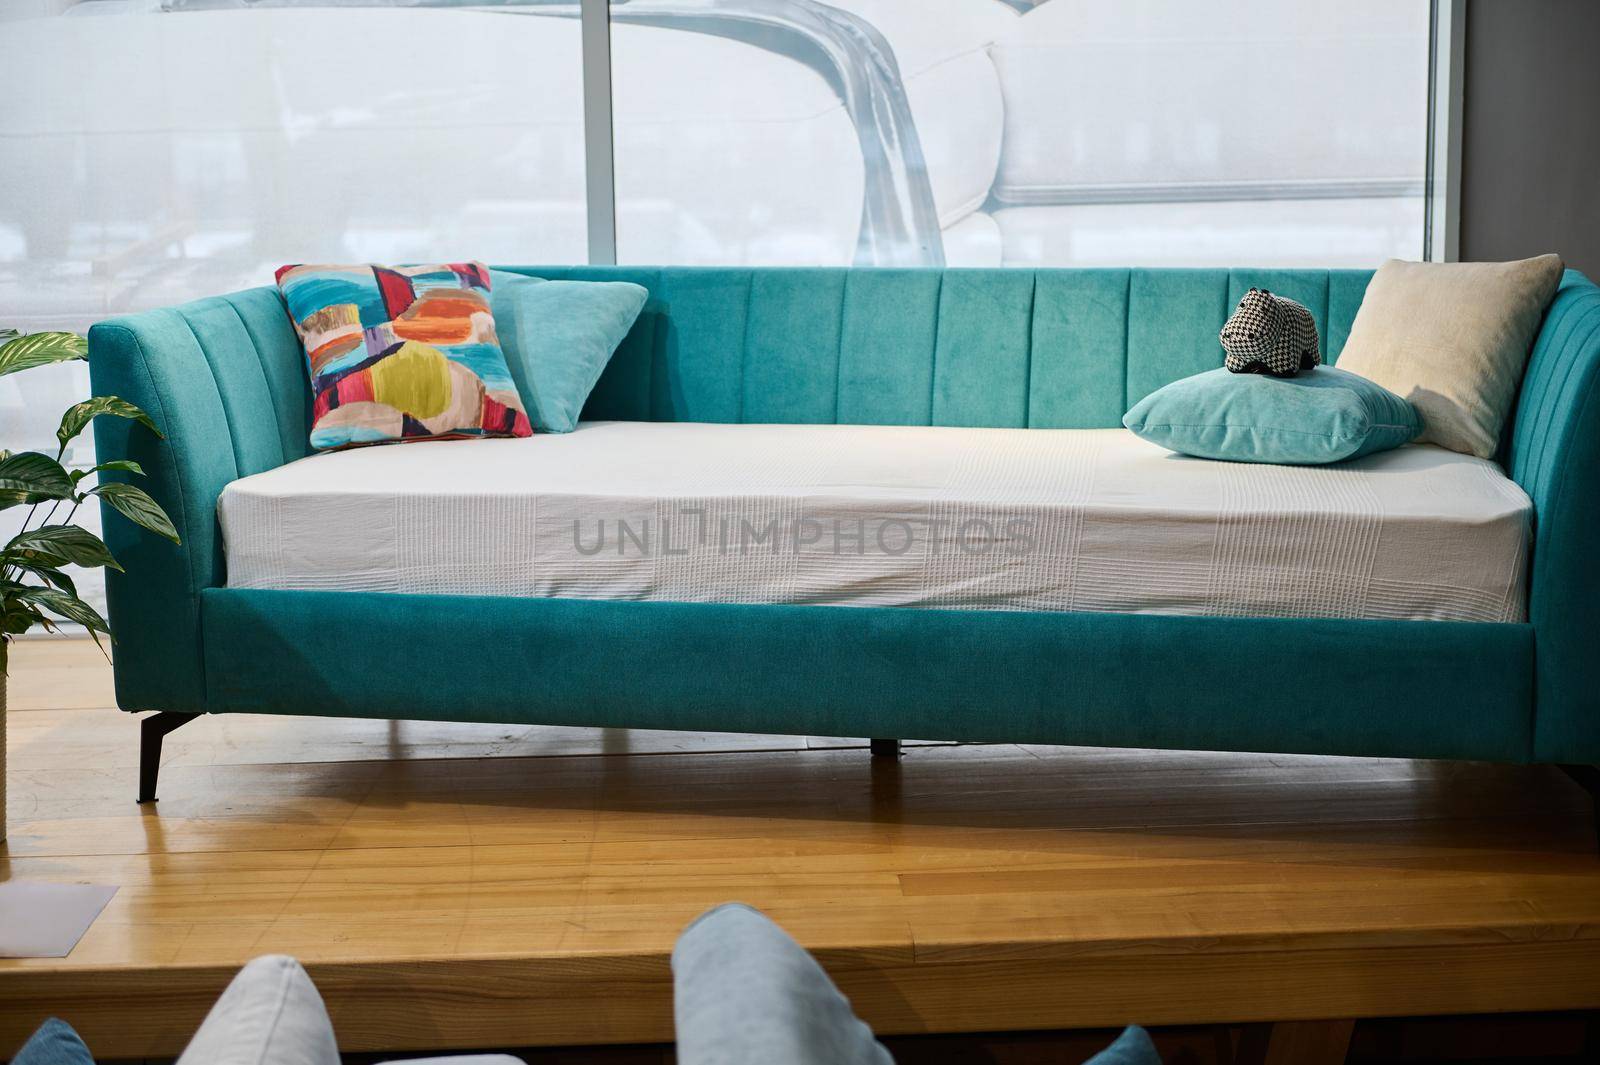 Modern beautiful stylish and minimalist children's sofa bed with soft bright turquoise velour fabric, displayed for sale in the furniture store showroom